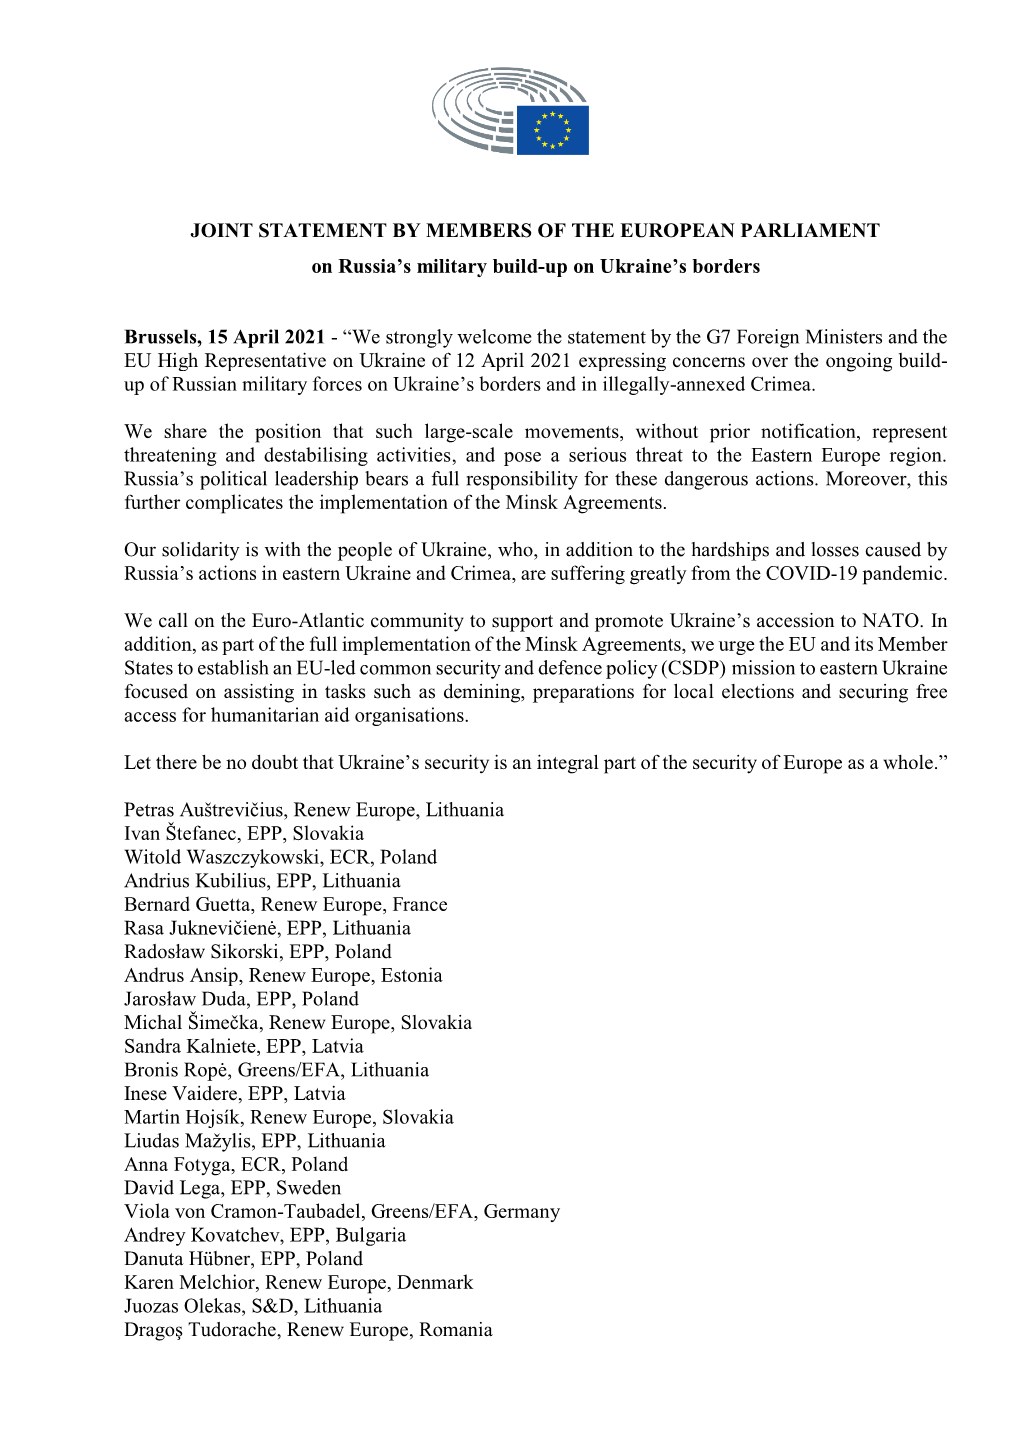 JOINT STATEMENT by MEMBERS of the EUROPEAN PARLIAMENT on Russia’S Military Build-Up on Ukraine’S Borders